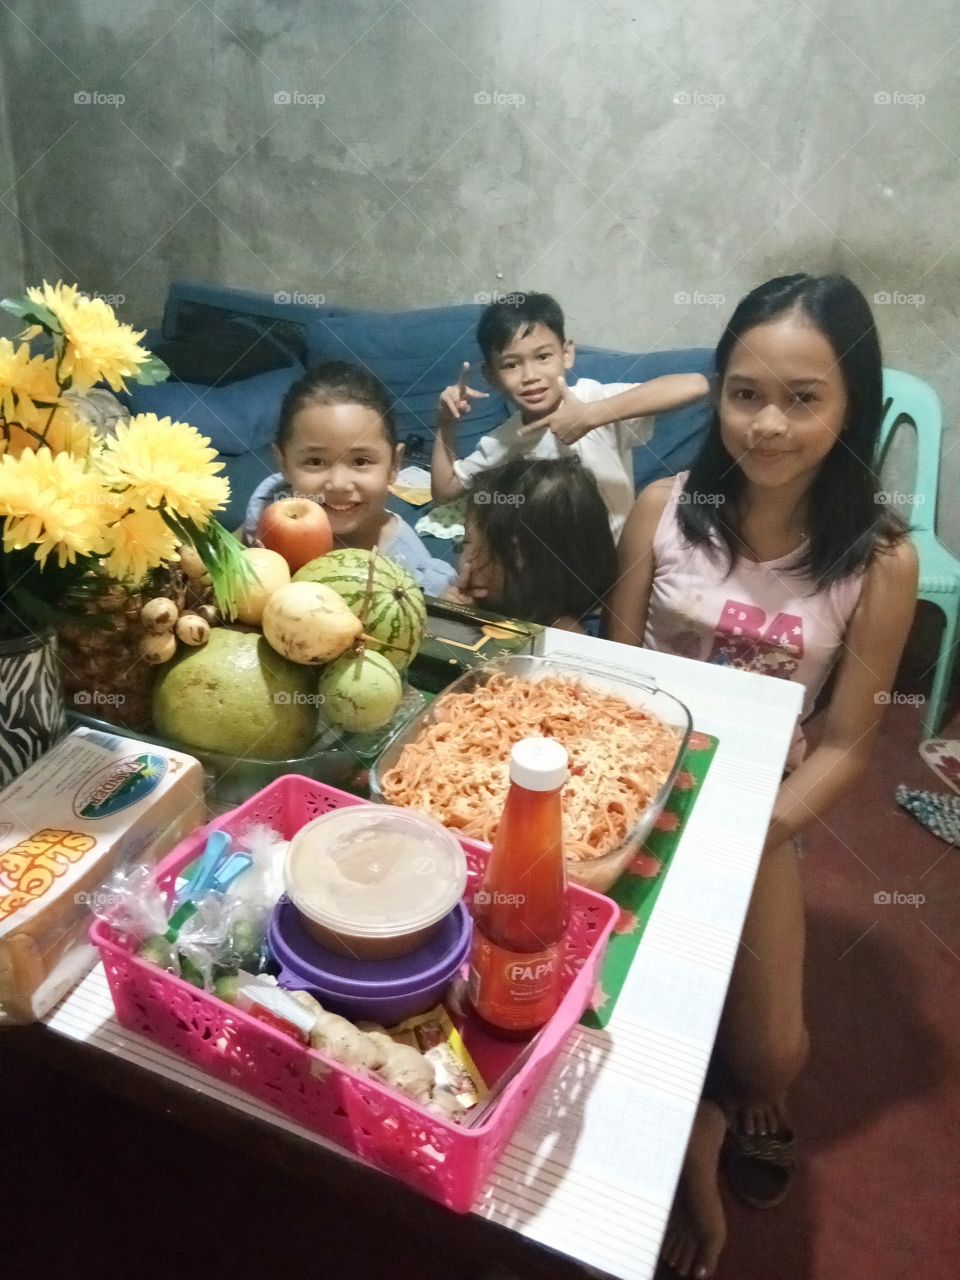 kids bonding with food to share